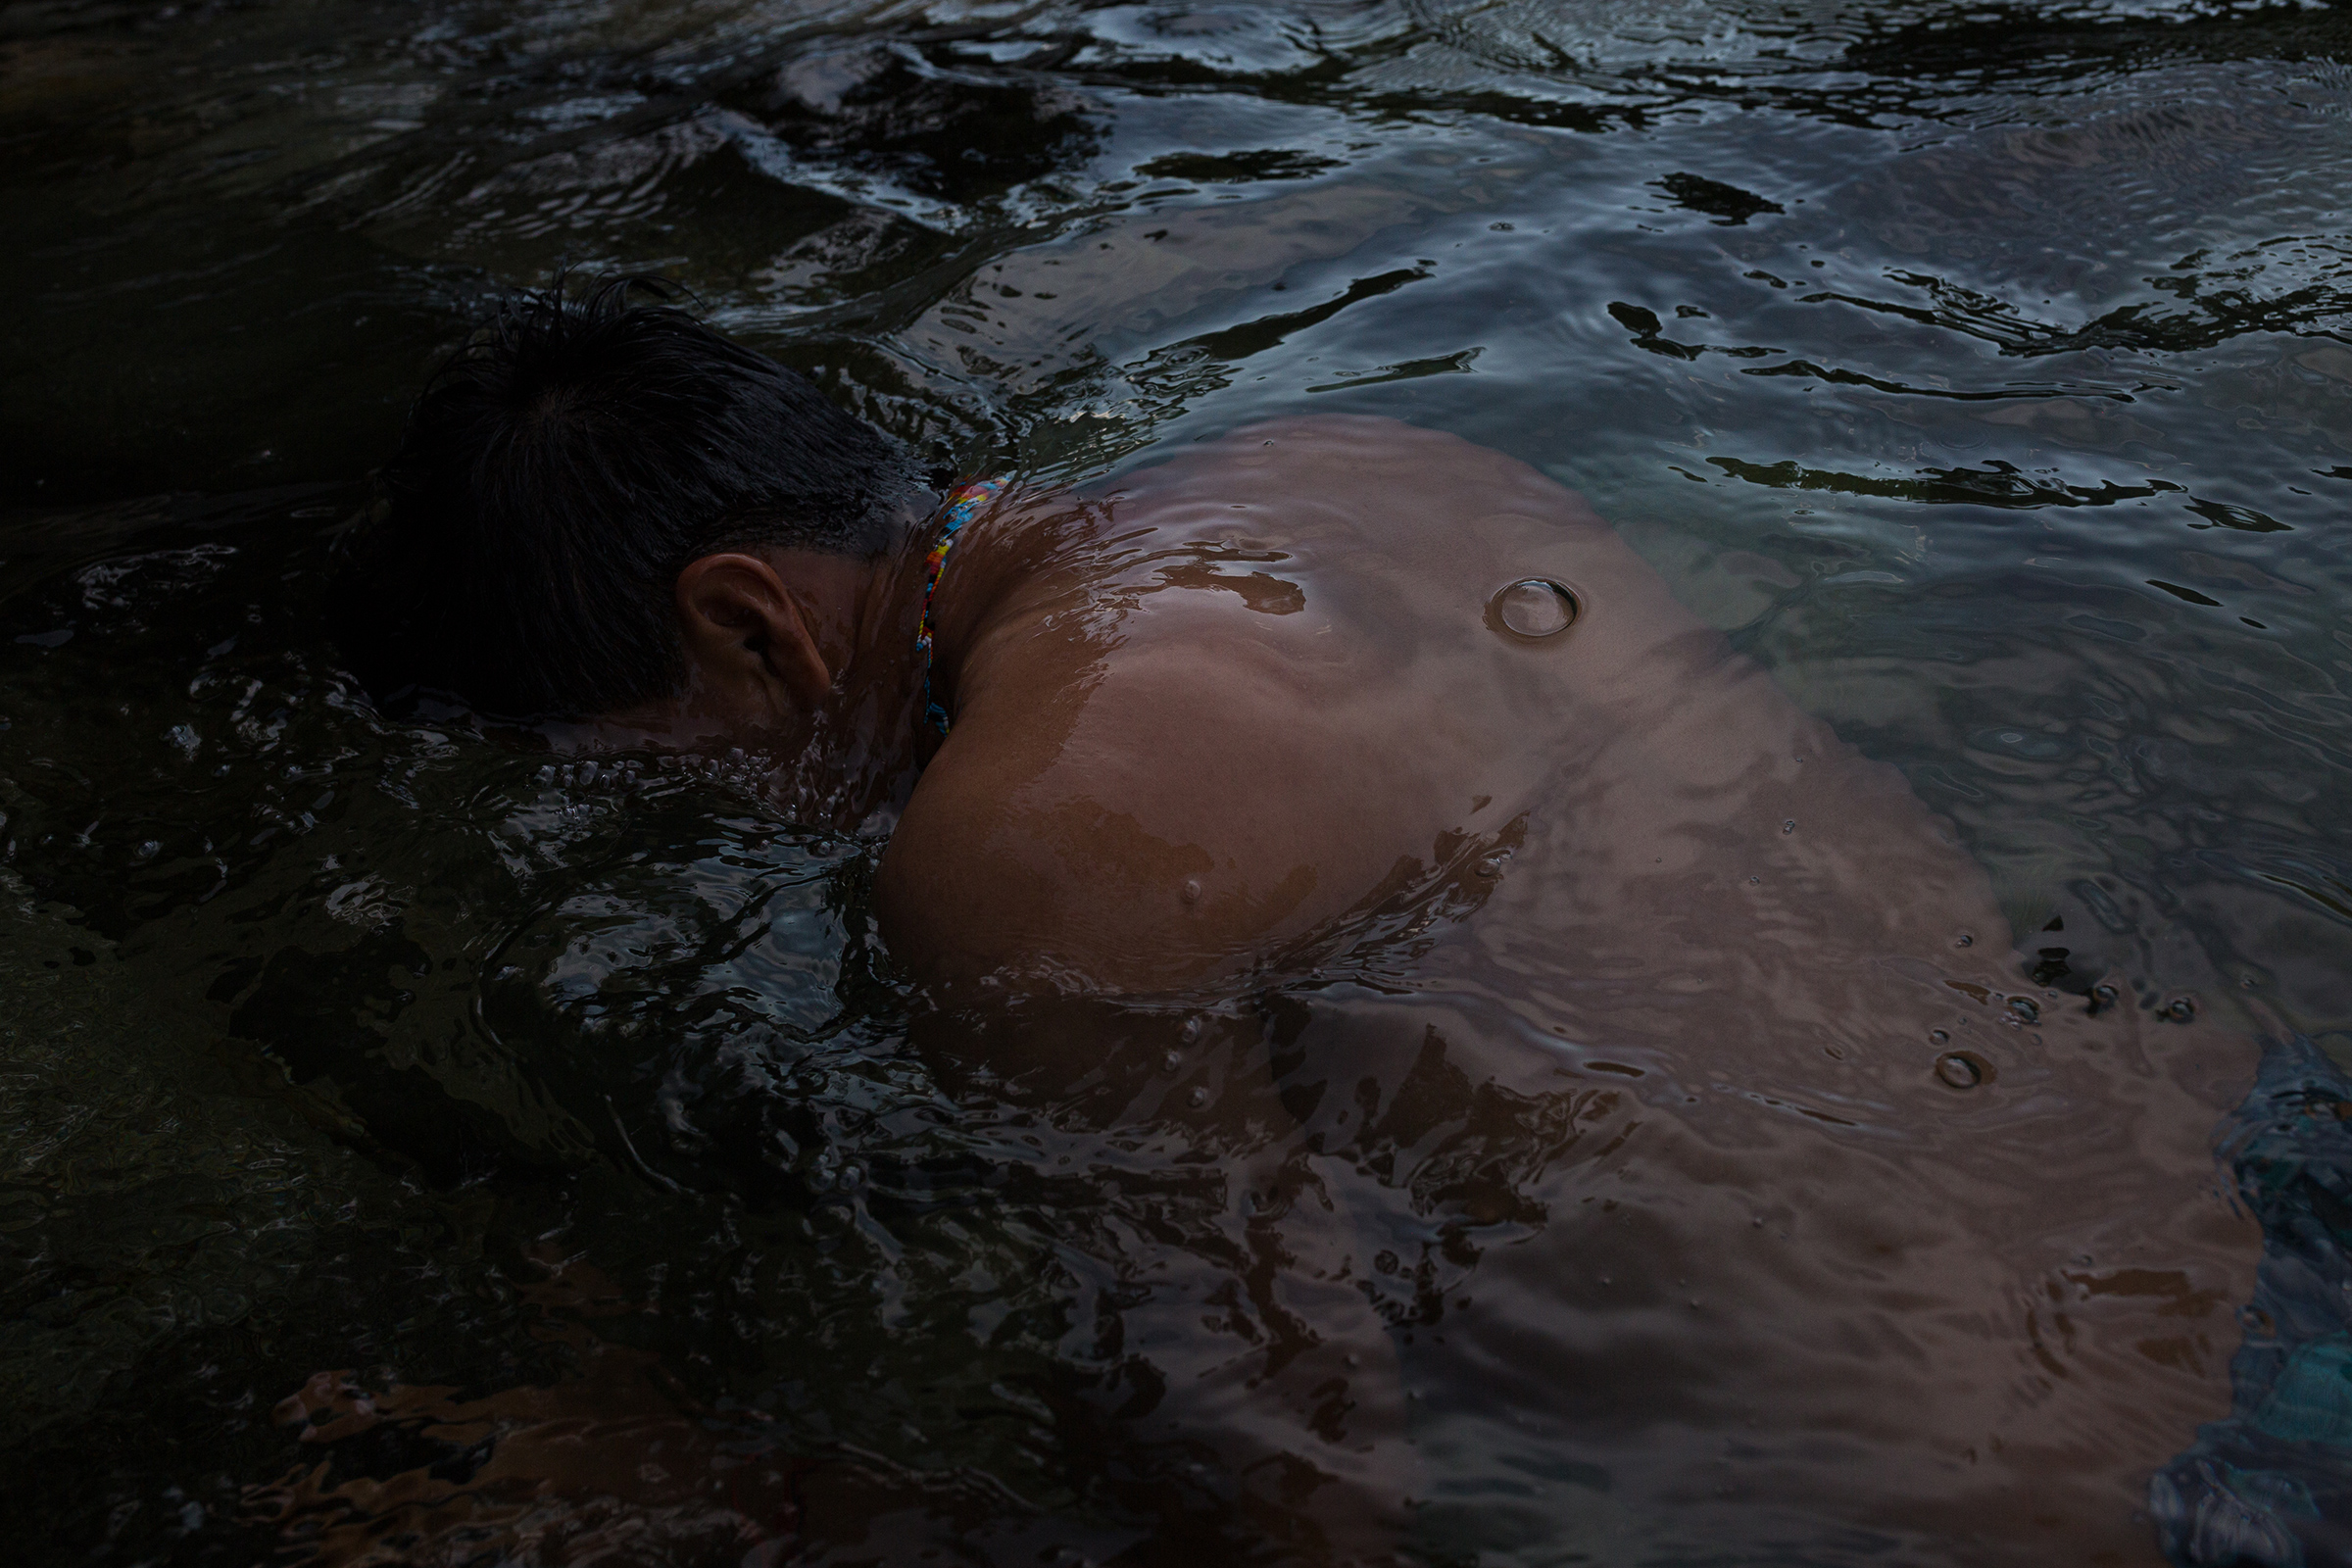 Alexis Grefa, a Kichwa Indigenous activist, takes a dip in the Piatúa River, which he seeks to protect. (Andrés Yépez for TIME)